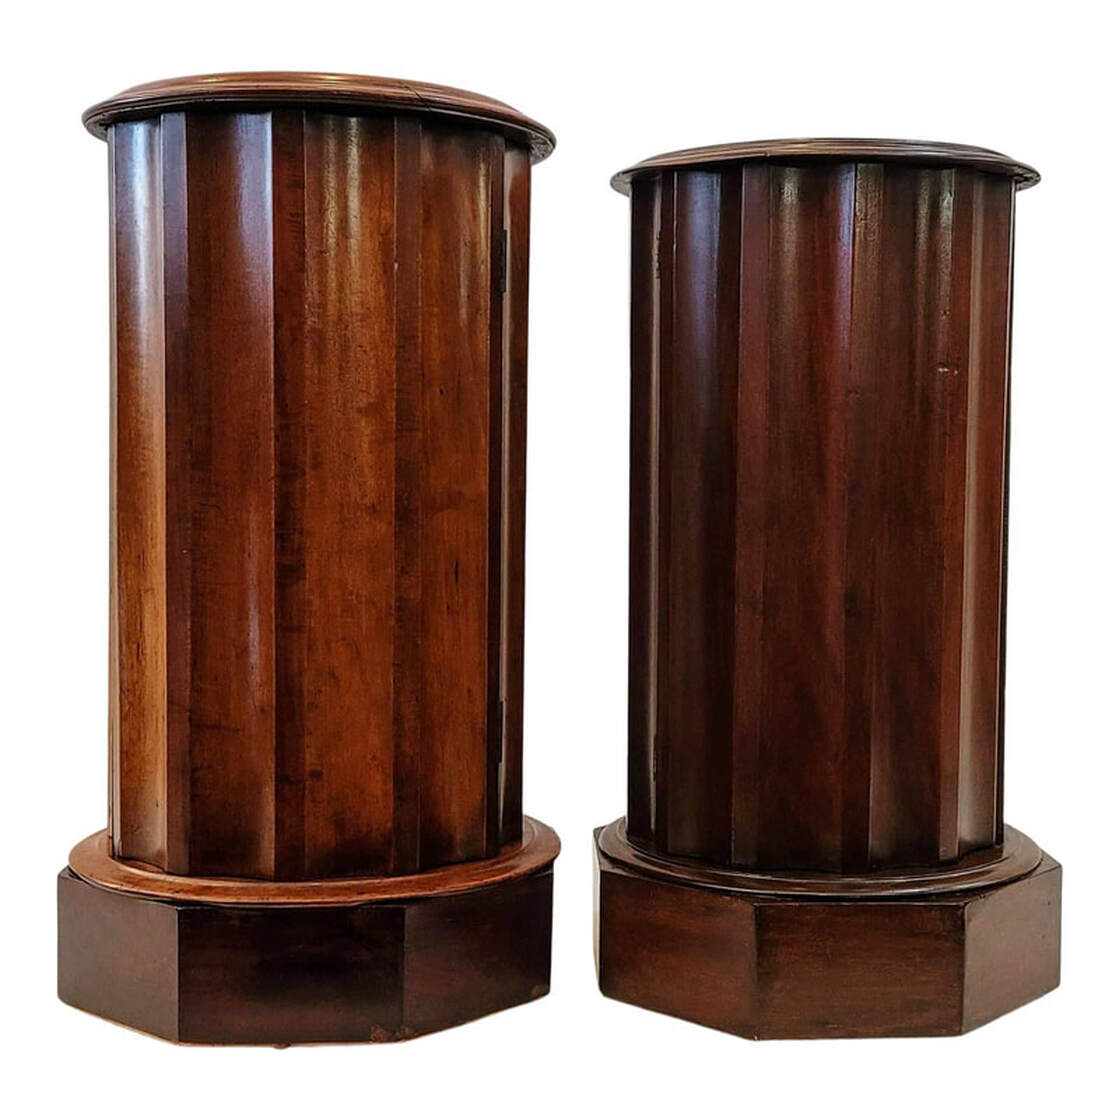 Two bedside cabinets from Victorian England in the architectural shape of fluted columns on octagonal plinth bases. 